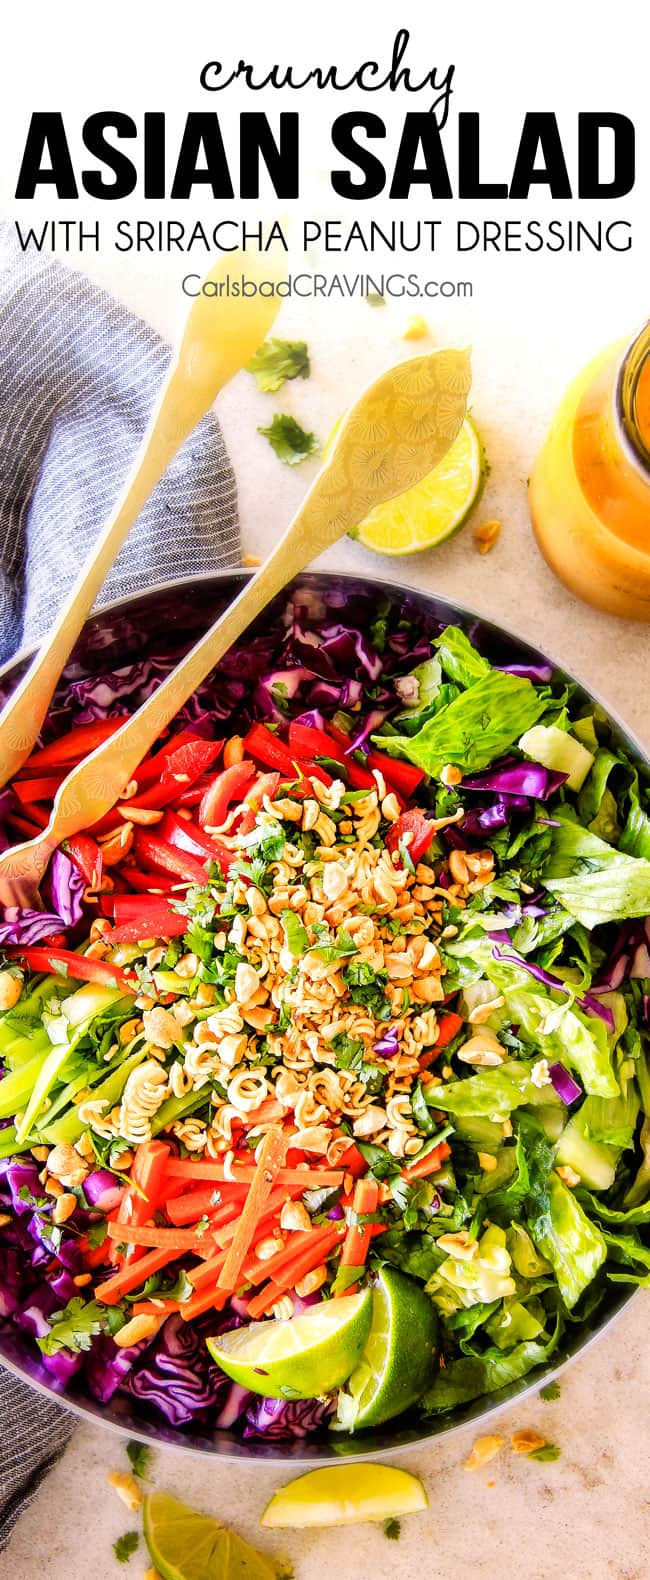 This Crunchy Asian Salad with Sriracha peanut Dressing is CRAZY GOOD!   The combination of texures is amazing and the dressing is absolutely addicting!  This salad is so good I was actually eating leftovers for breakfast! 